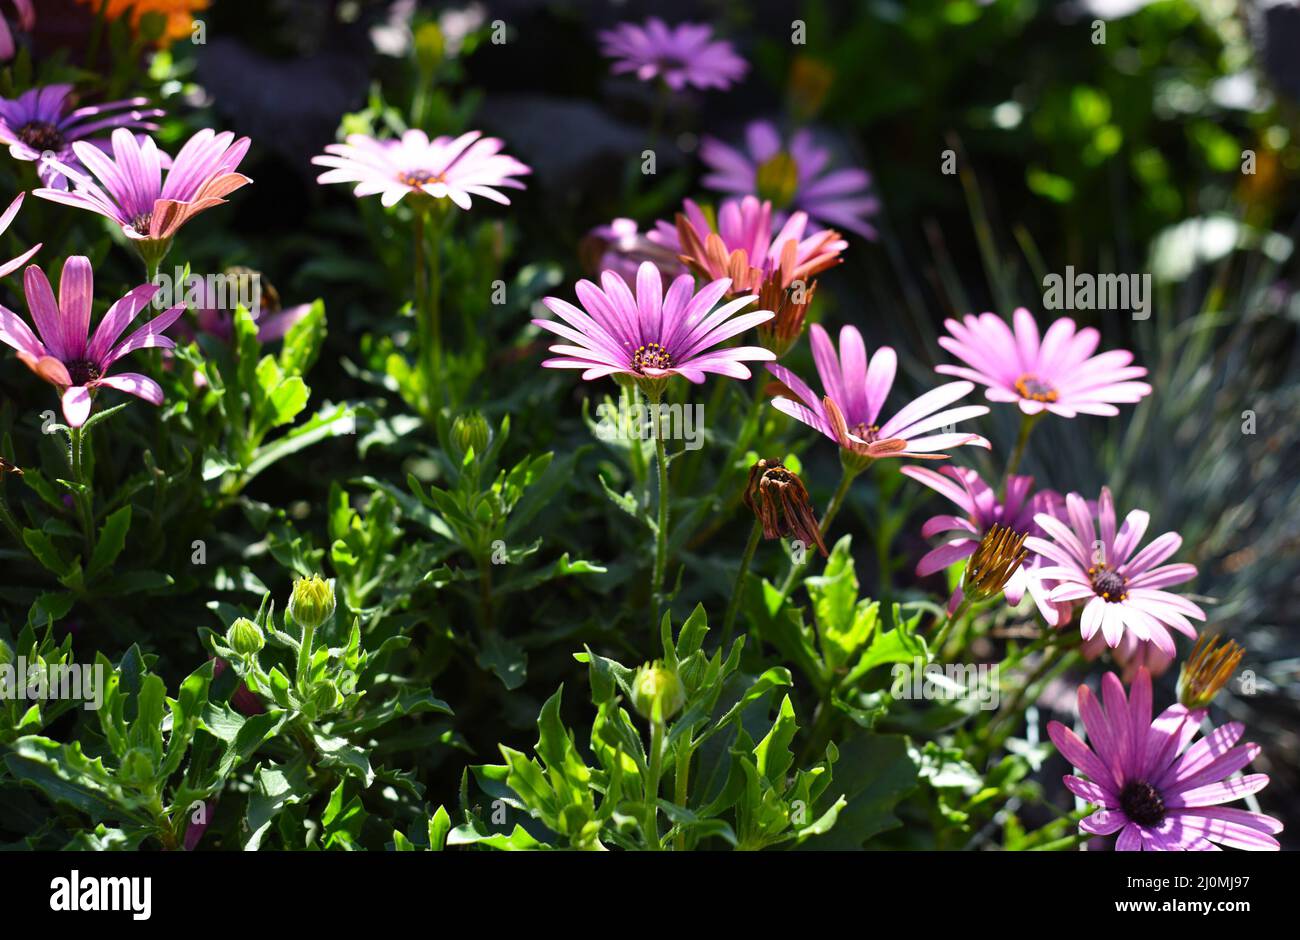 Osteospermum known as the daisybush or African daisy Stock Photo